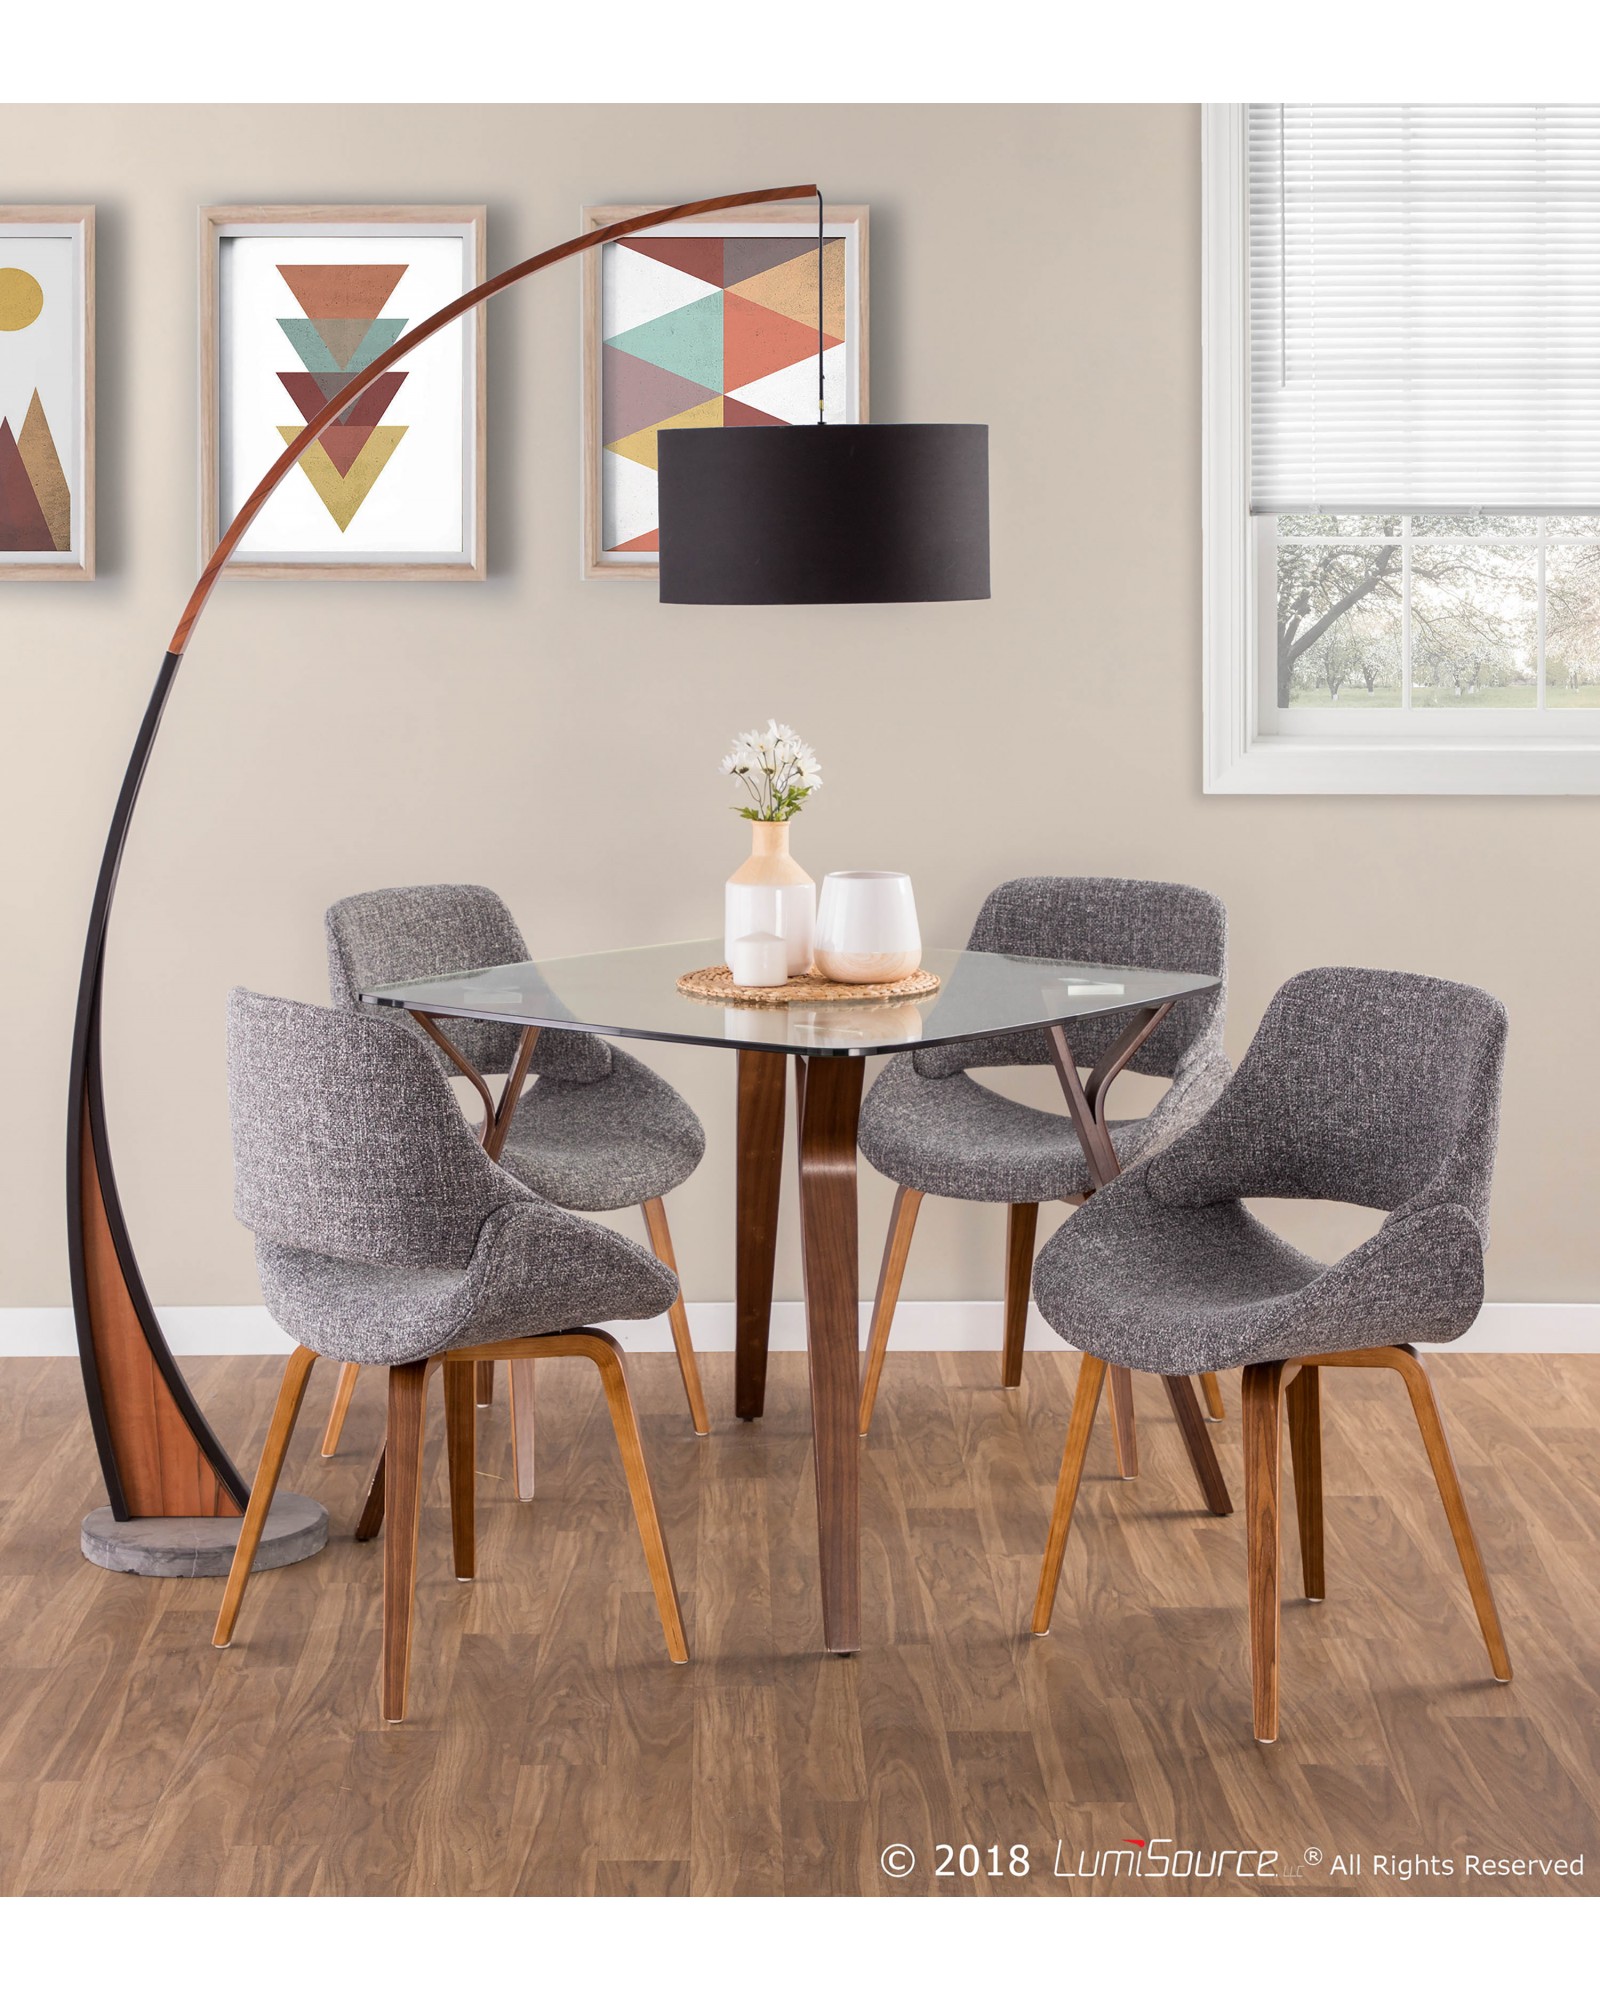 Folia Mid-Century Modern Dining Table in Walnut and Glass